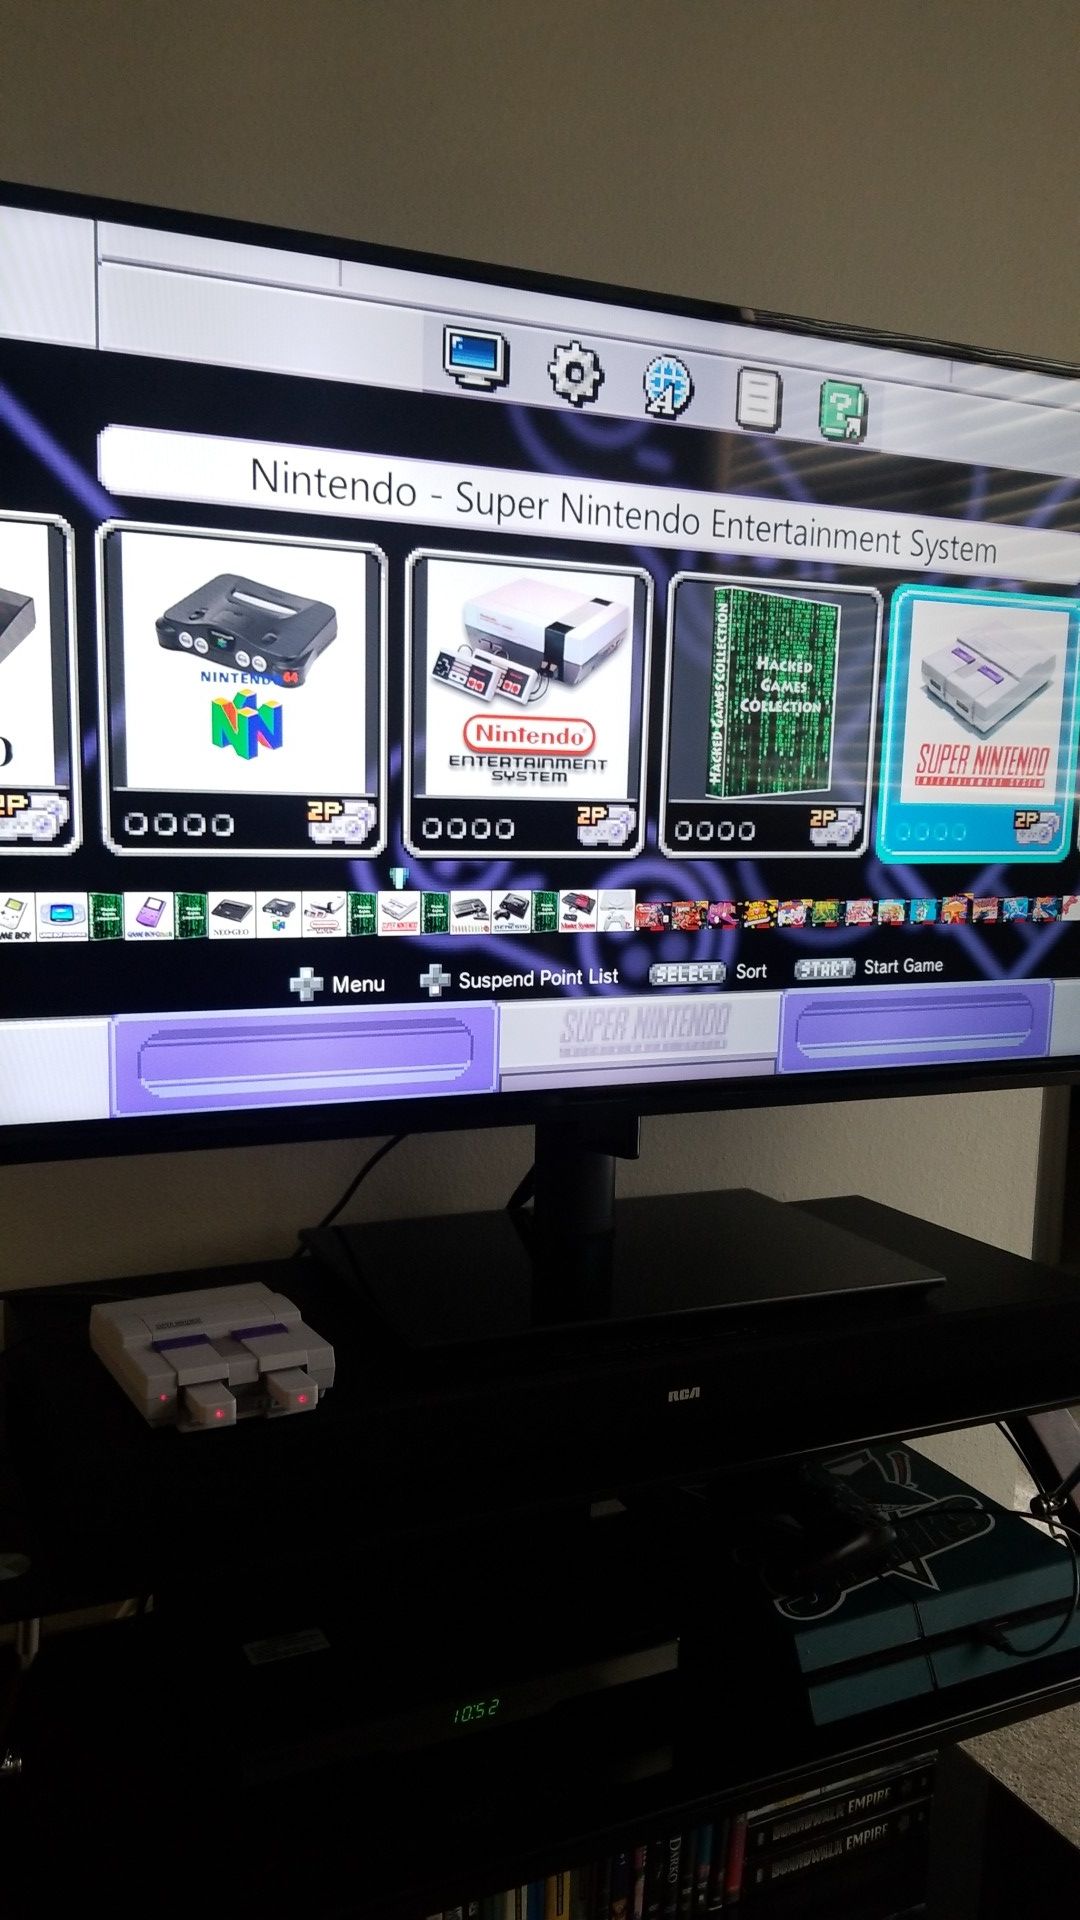 Modded SNES Classic